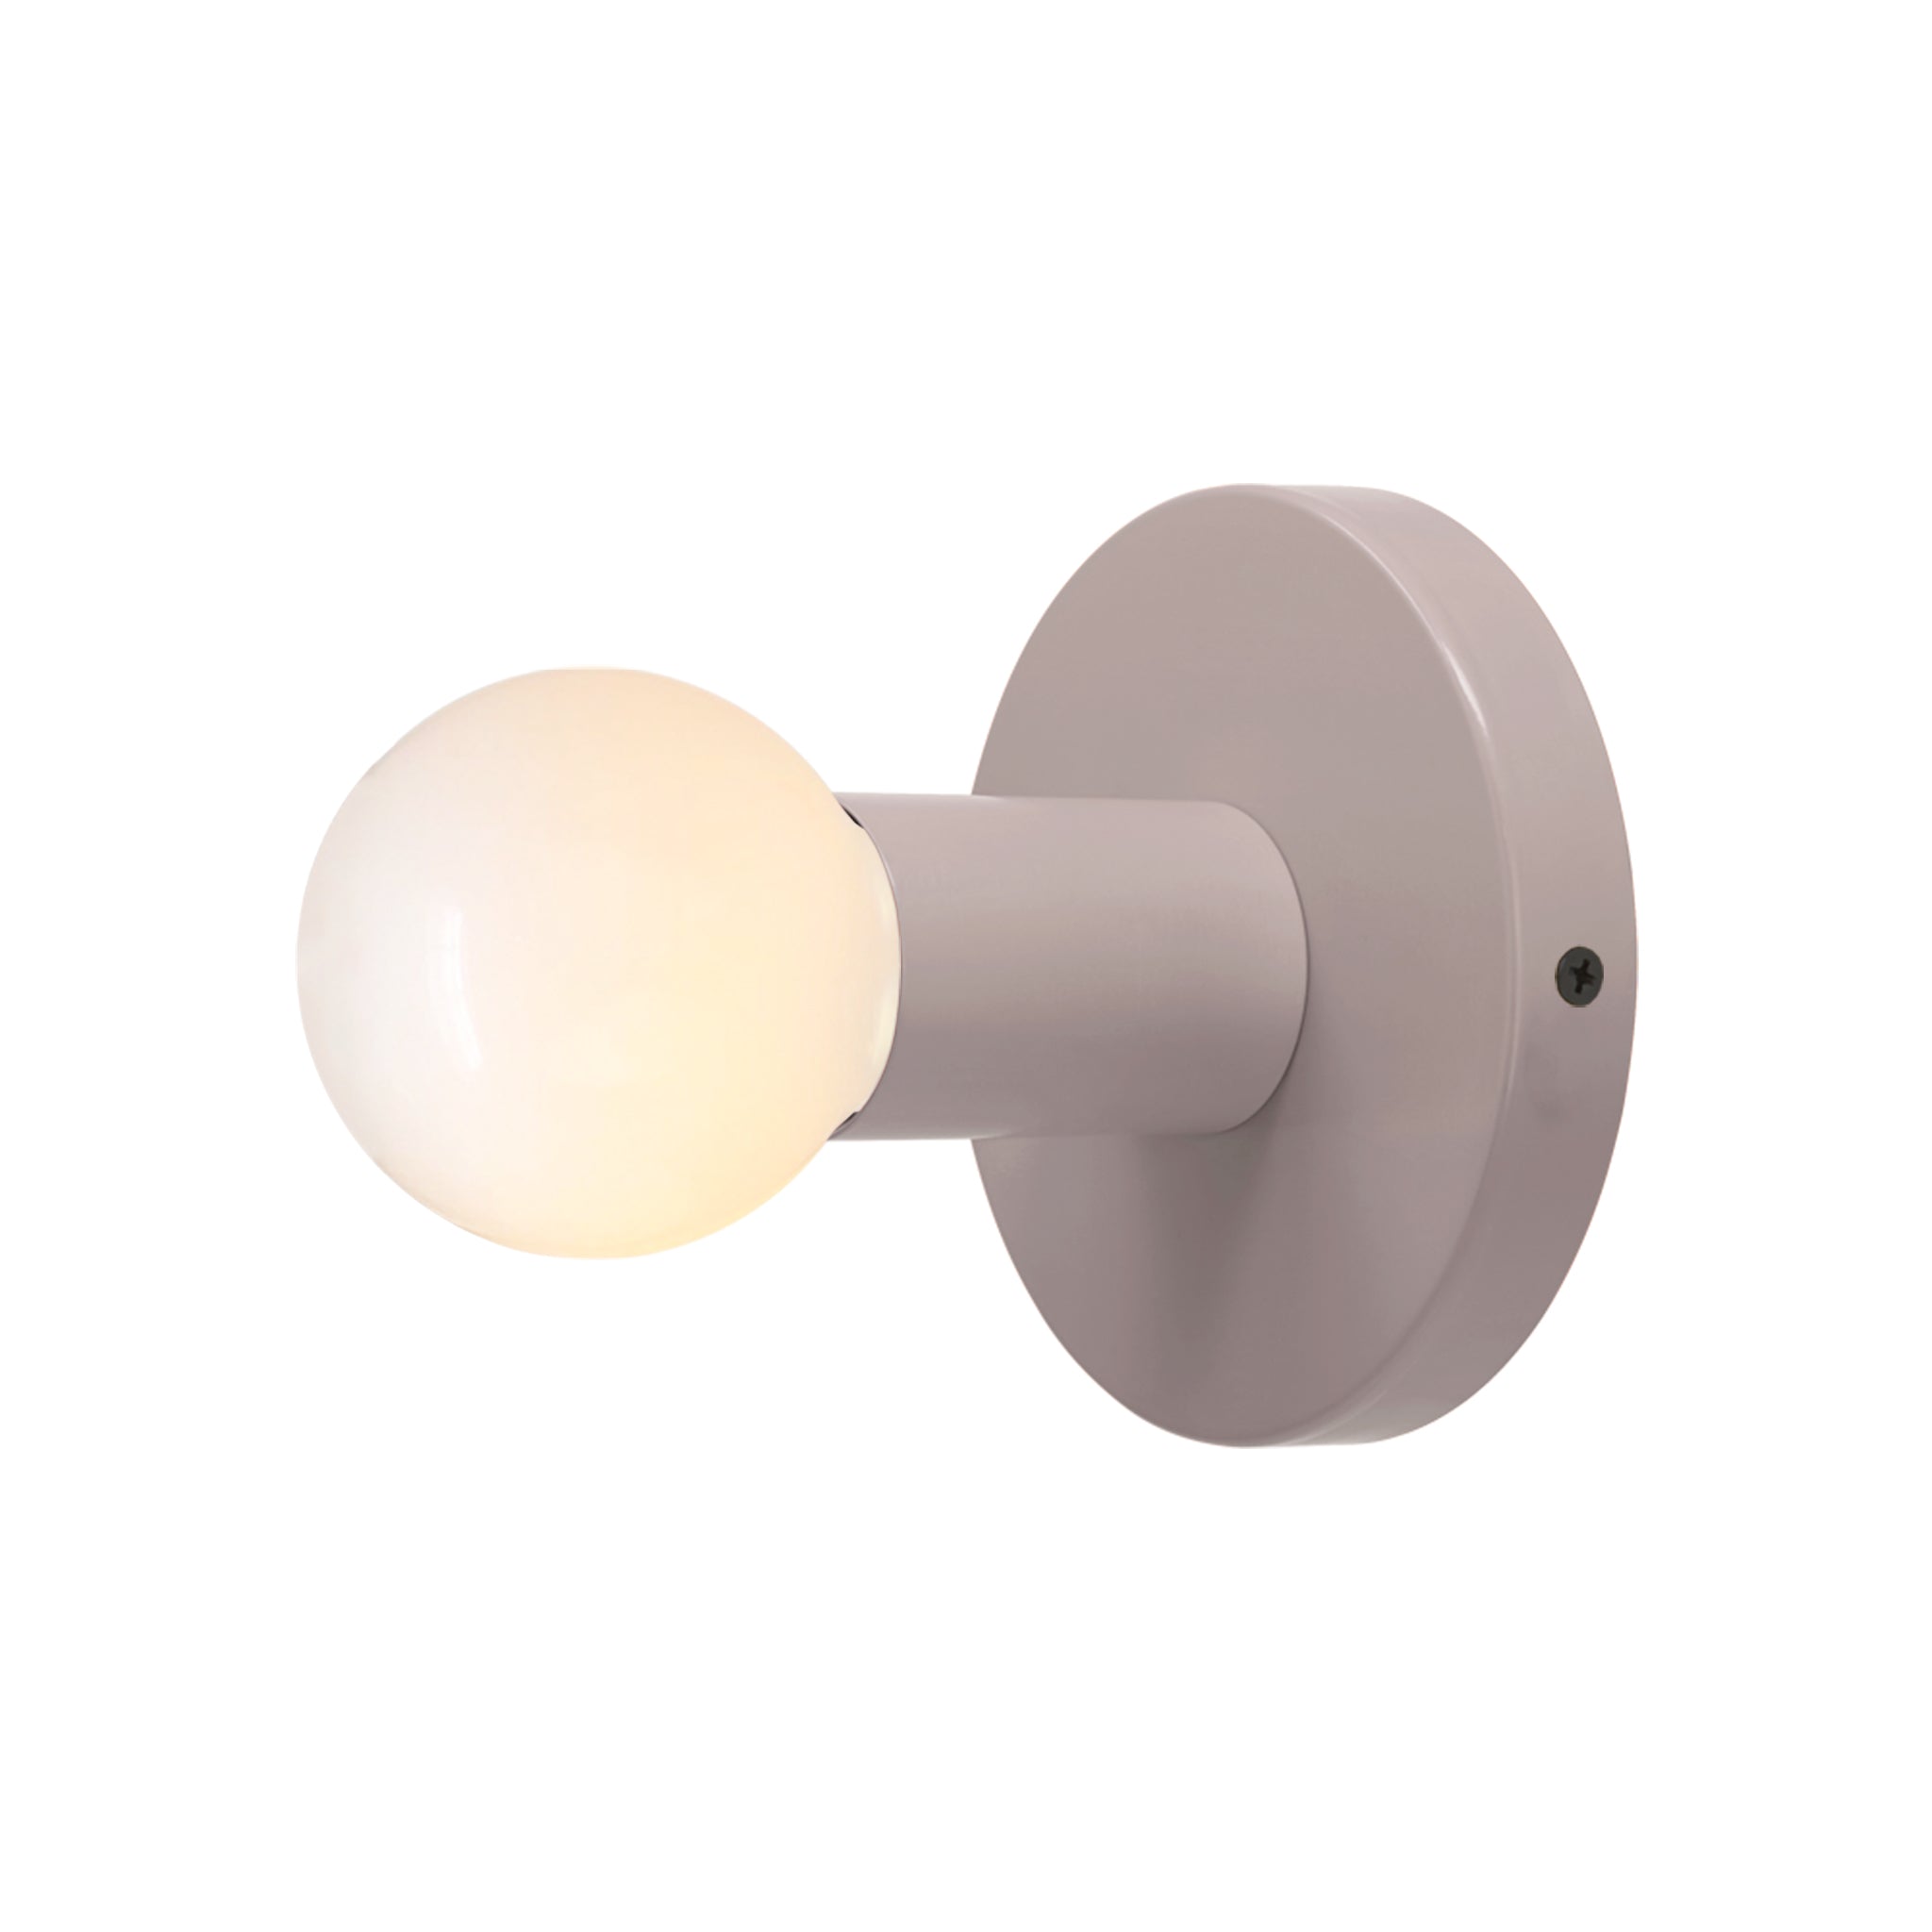 Black and chalk color Twink sconce Dutton Brown lighting